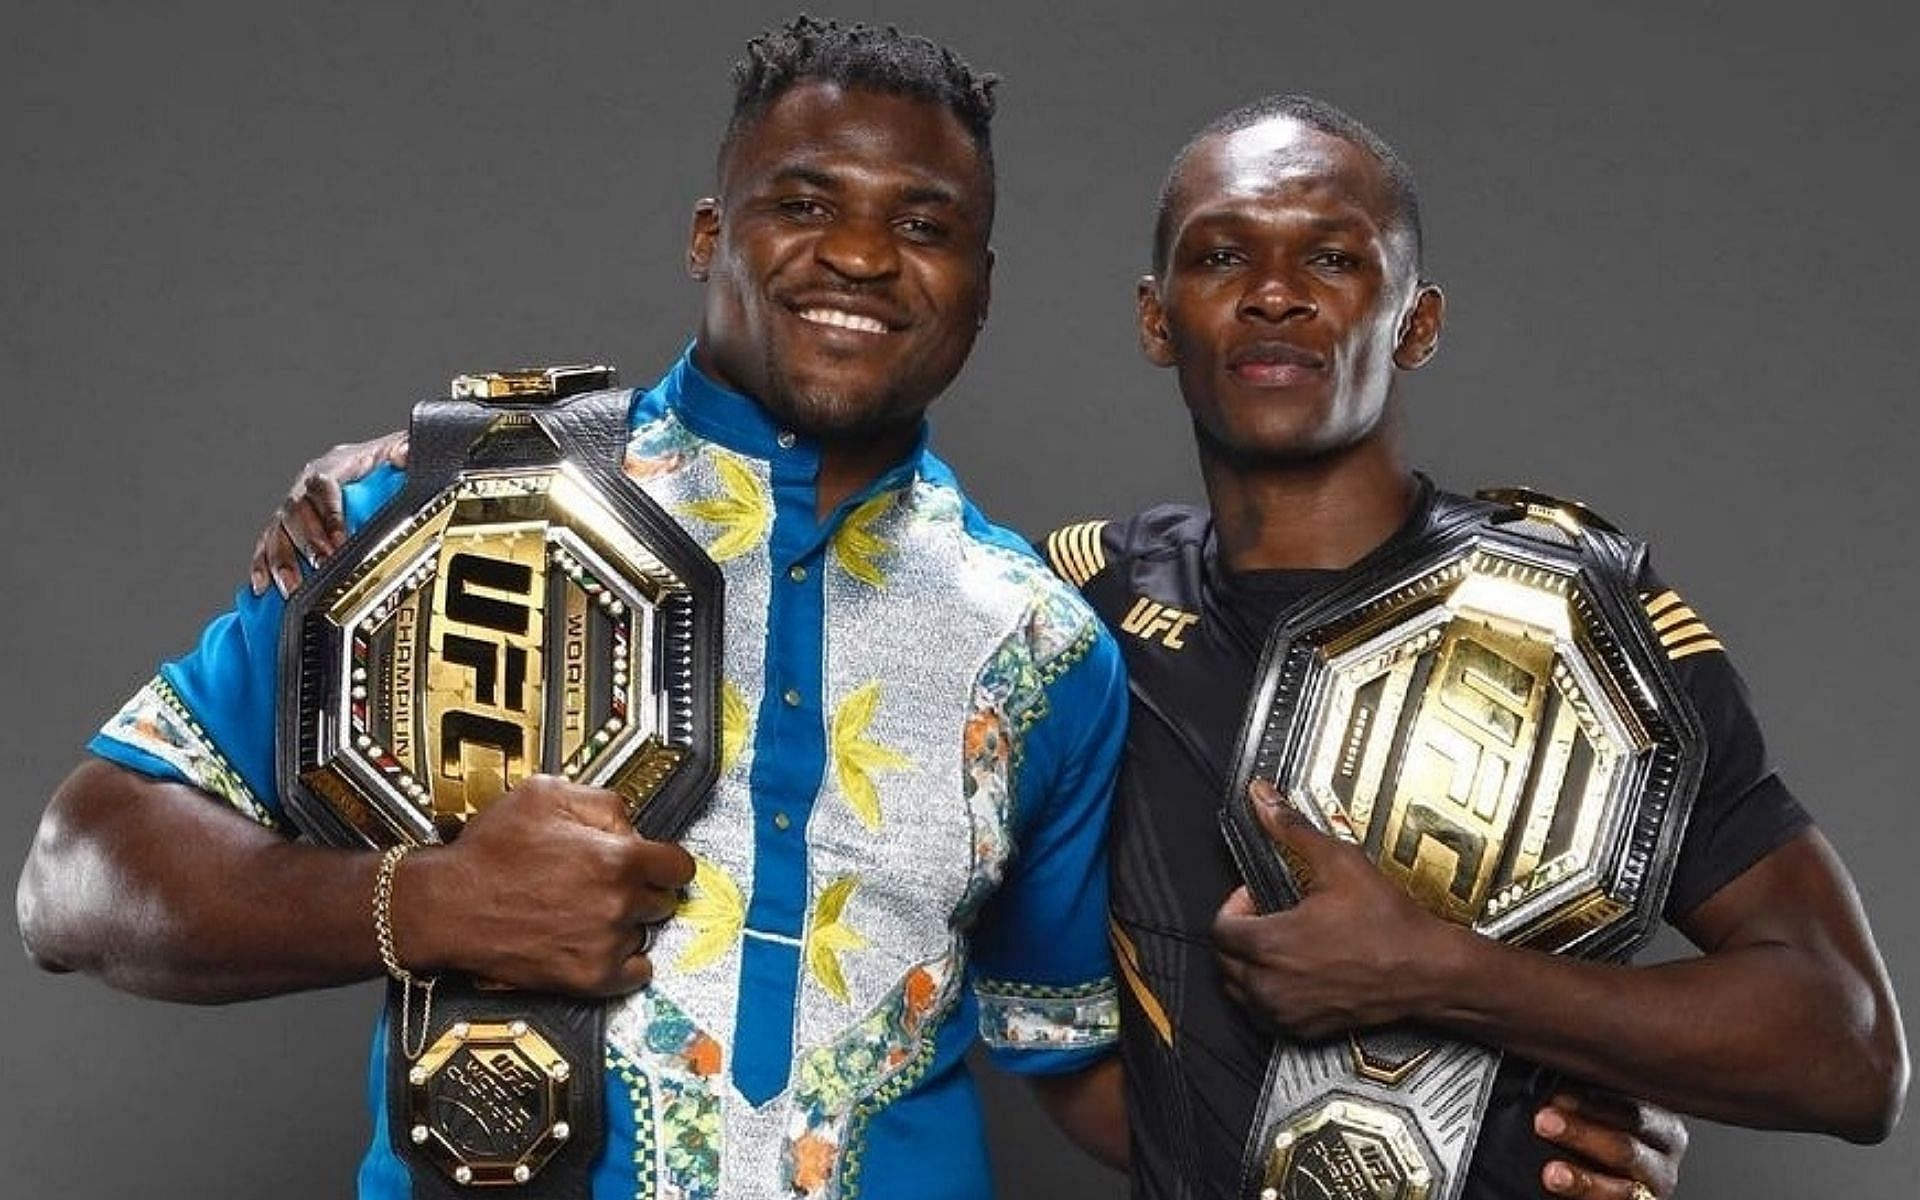 Israel Adesanya explains how different Francis Ngannou is from his intimidating appearance: "He is a gentle giant"
